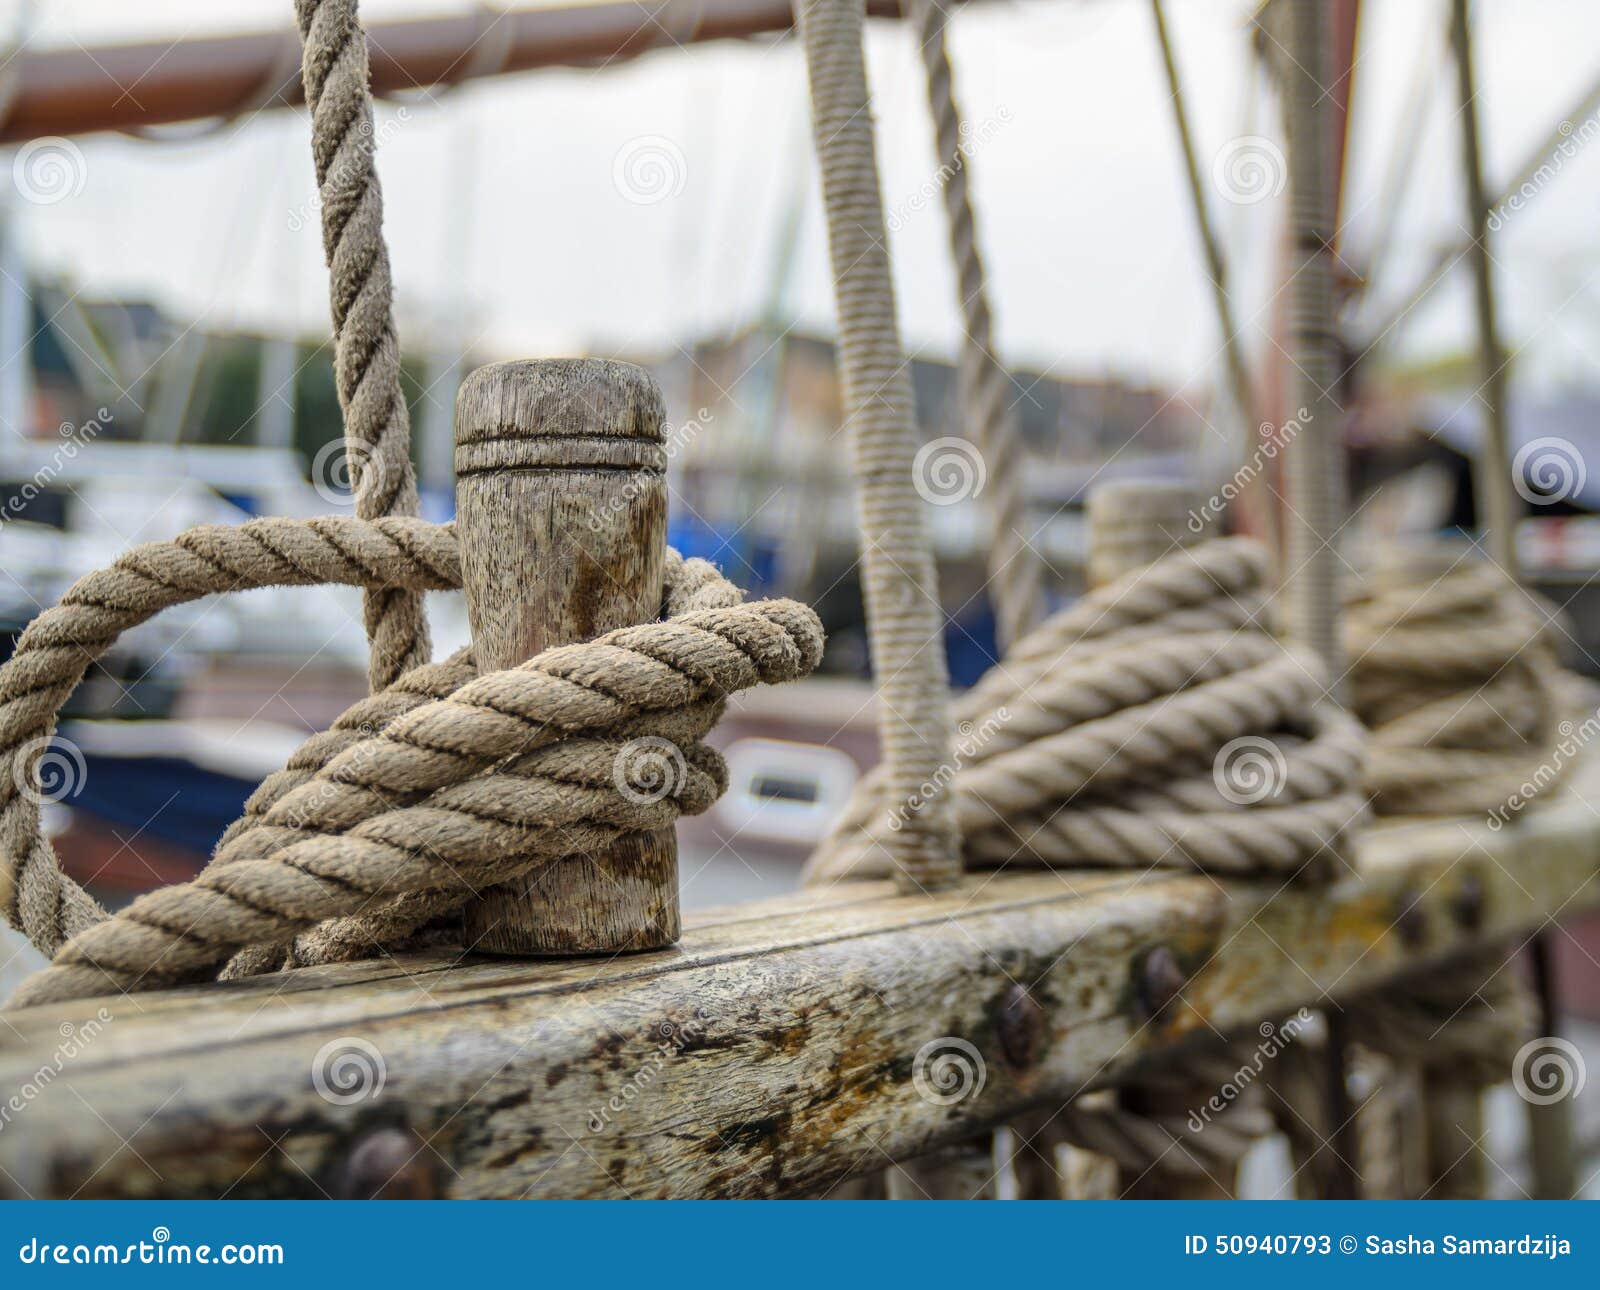 Ropes On The Side Of Old Sailing Ship Stock Image - Image ...